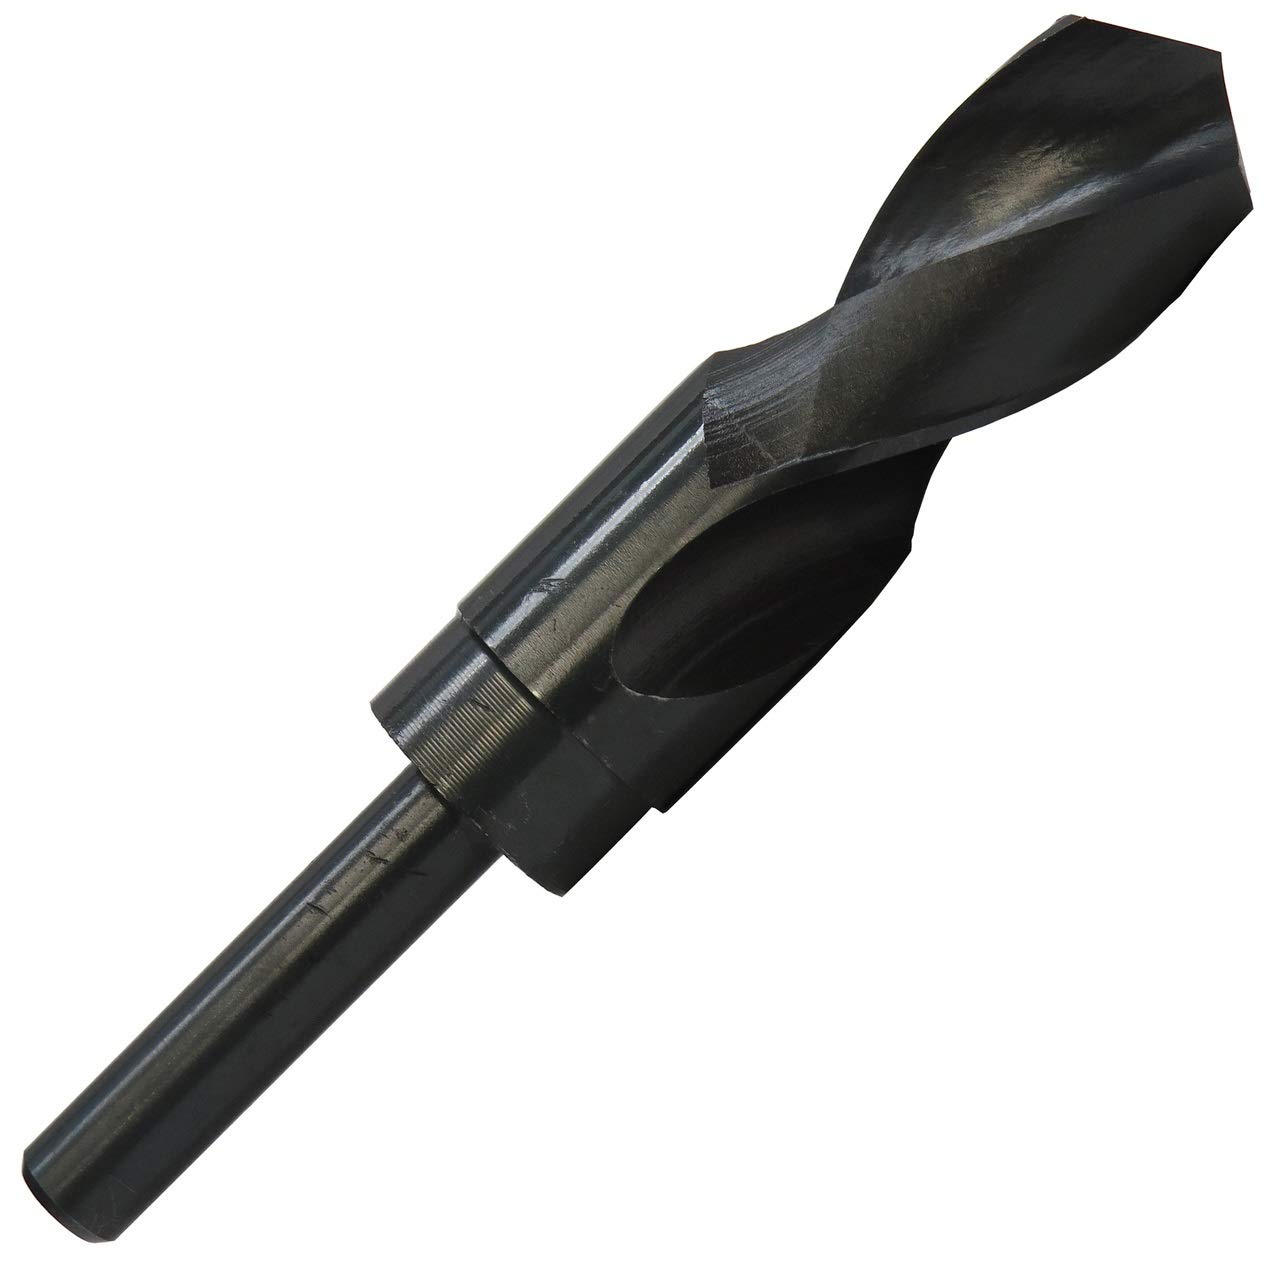 QUALTECH Reduced Shank HSS Silver and Deming Drill Bit Size: 1-1/64" 1/2"